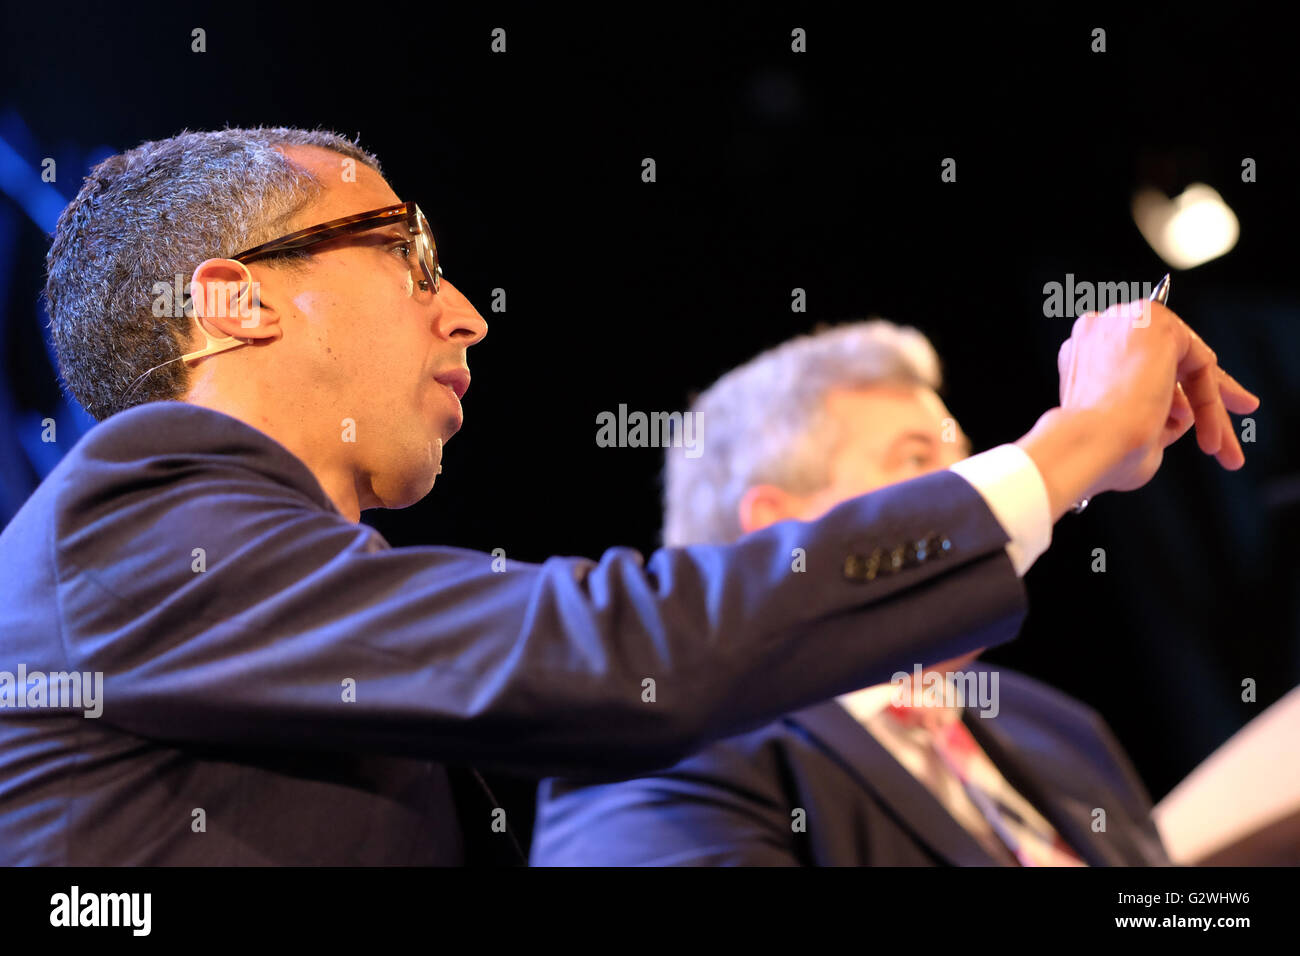 Hay Festival, Wales, UK - Saturday 4th June 2016 -  Kamal Ahmed the BBC Economics Editor on stage at Hay chairing an event with Mark Price the Minister of State for Trade and Investment. Stock Photo